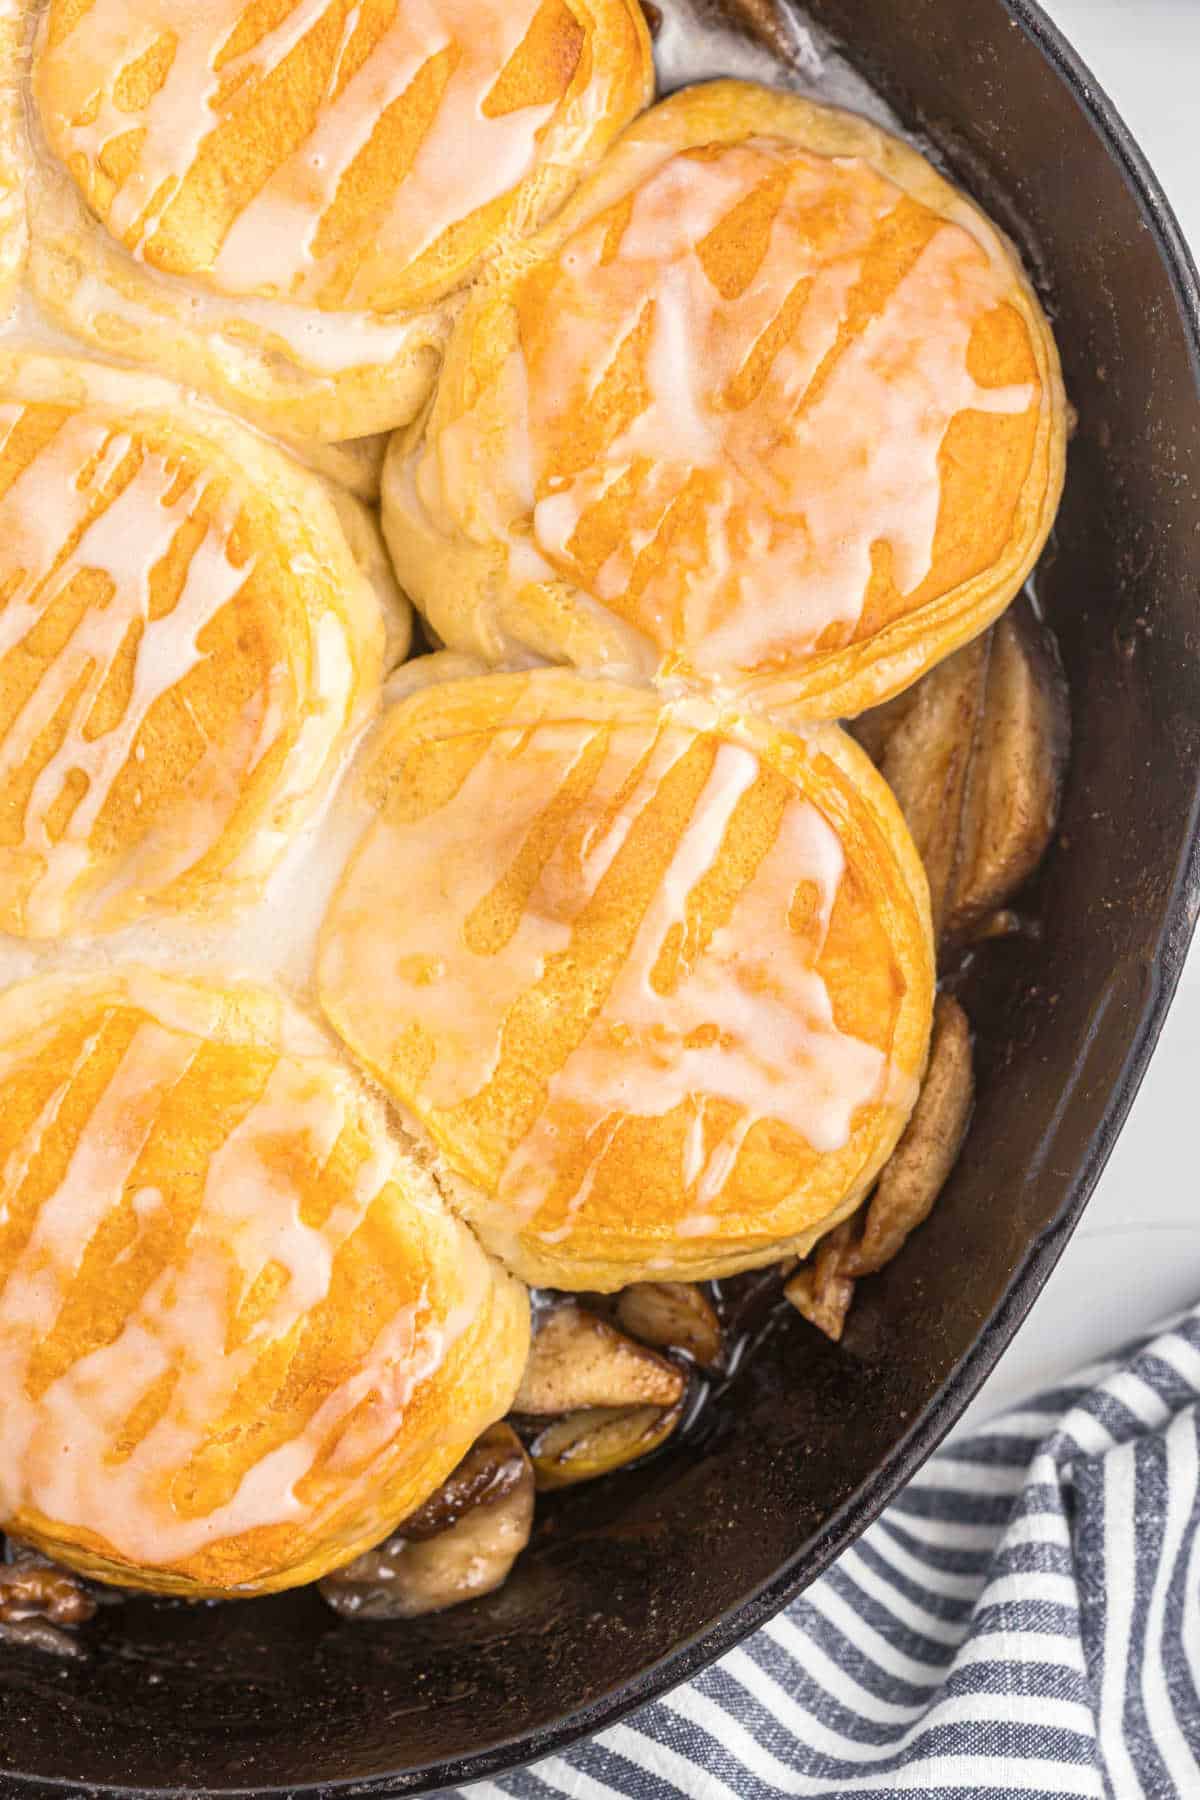 Cast iron skillet willed with apples and biscuits.